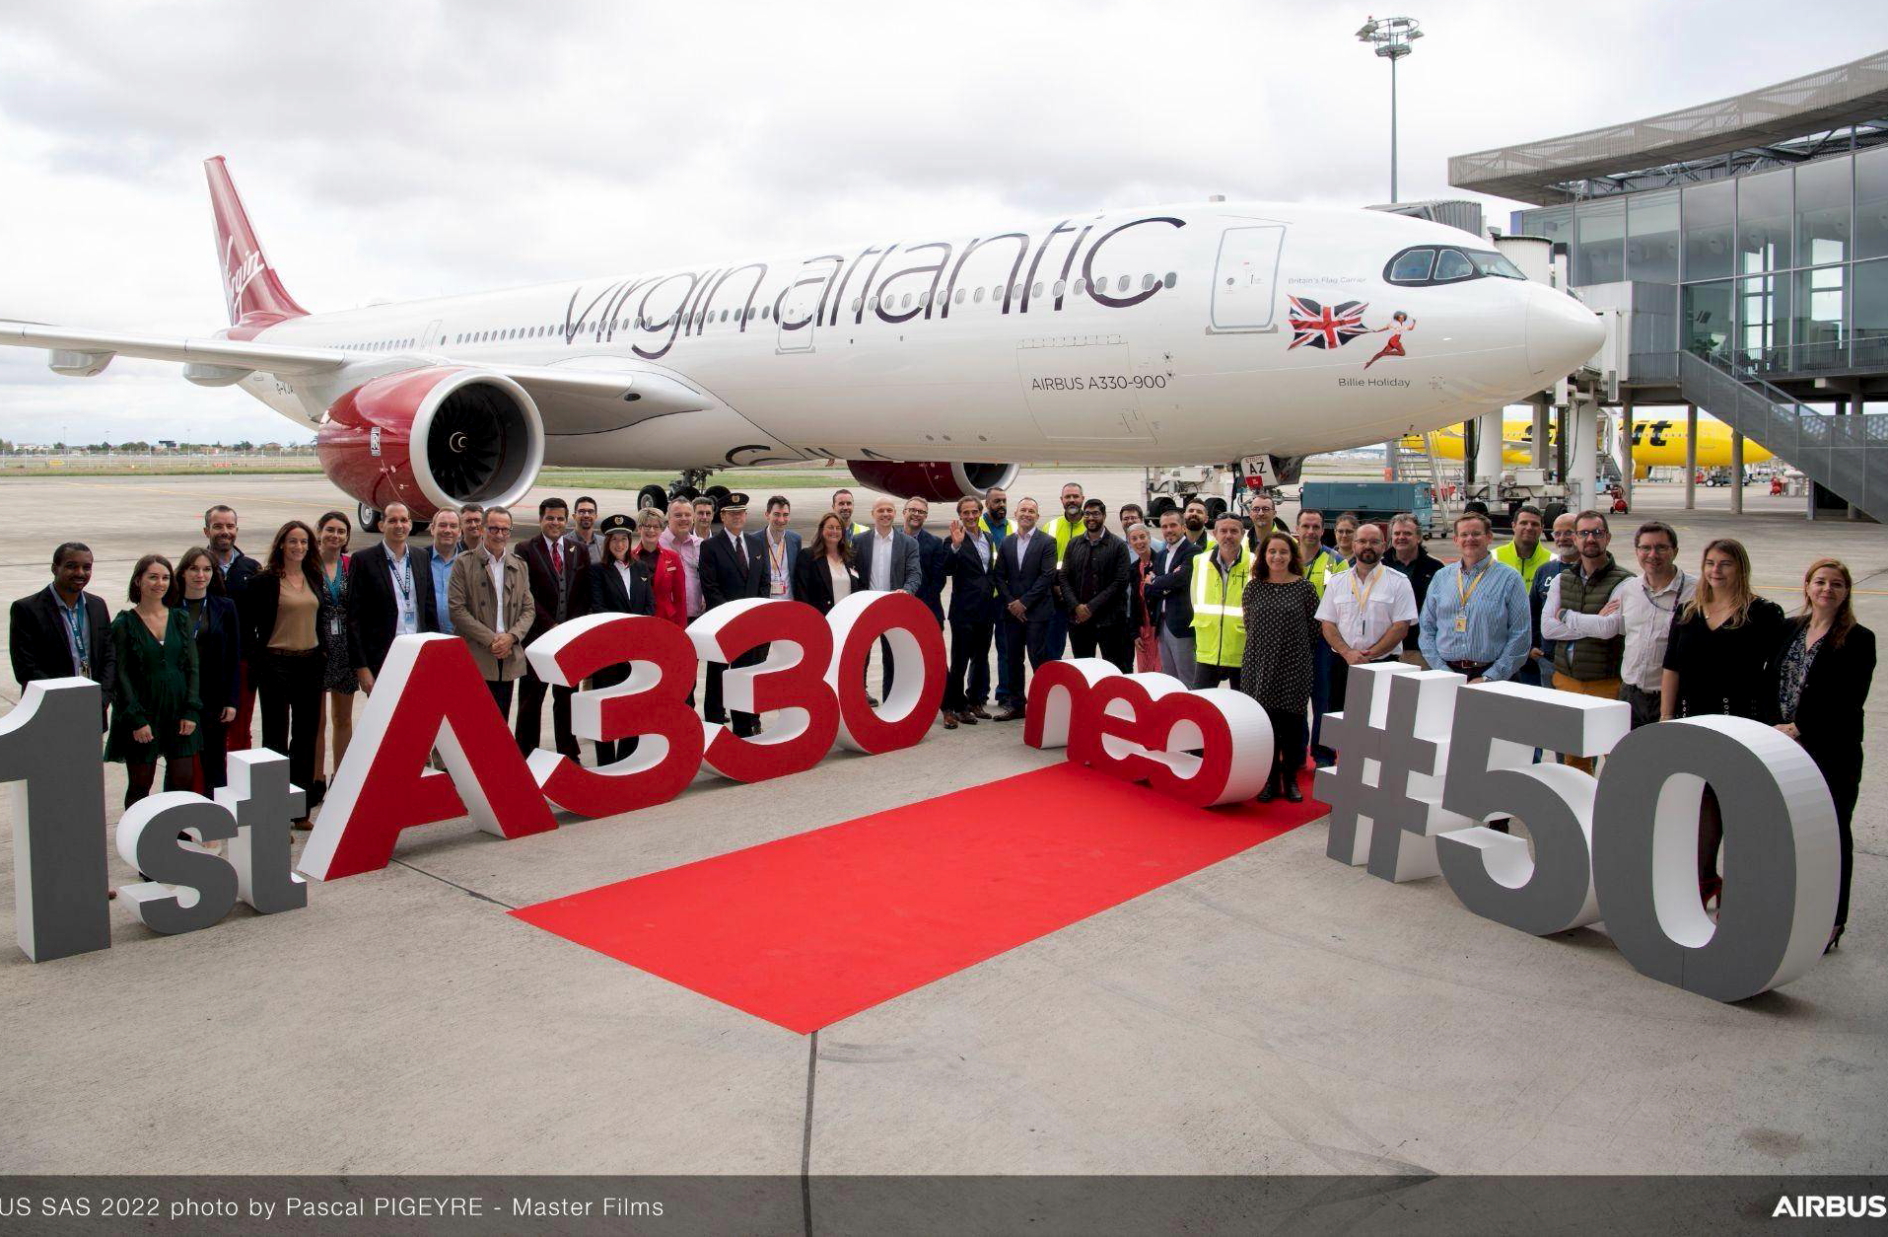 Virgin Atlantic Takes Delivery of First A330neo